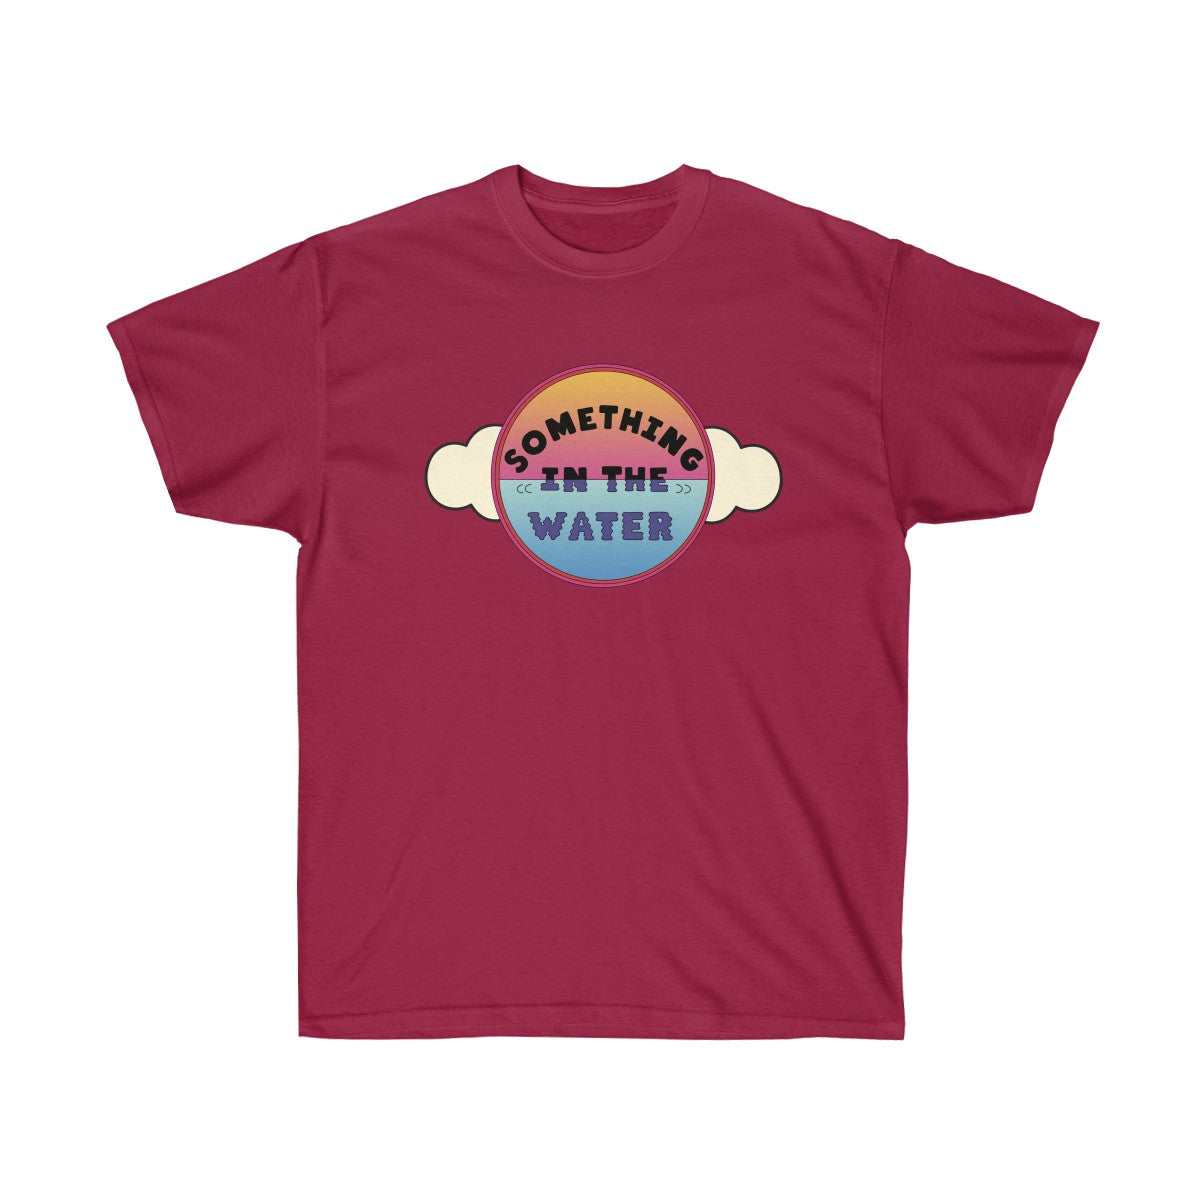 Something in the water Unisex Ultra Cotton Tee - Pharrell Williams festival inspired-Cardinal Red-S-Archethype